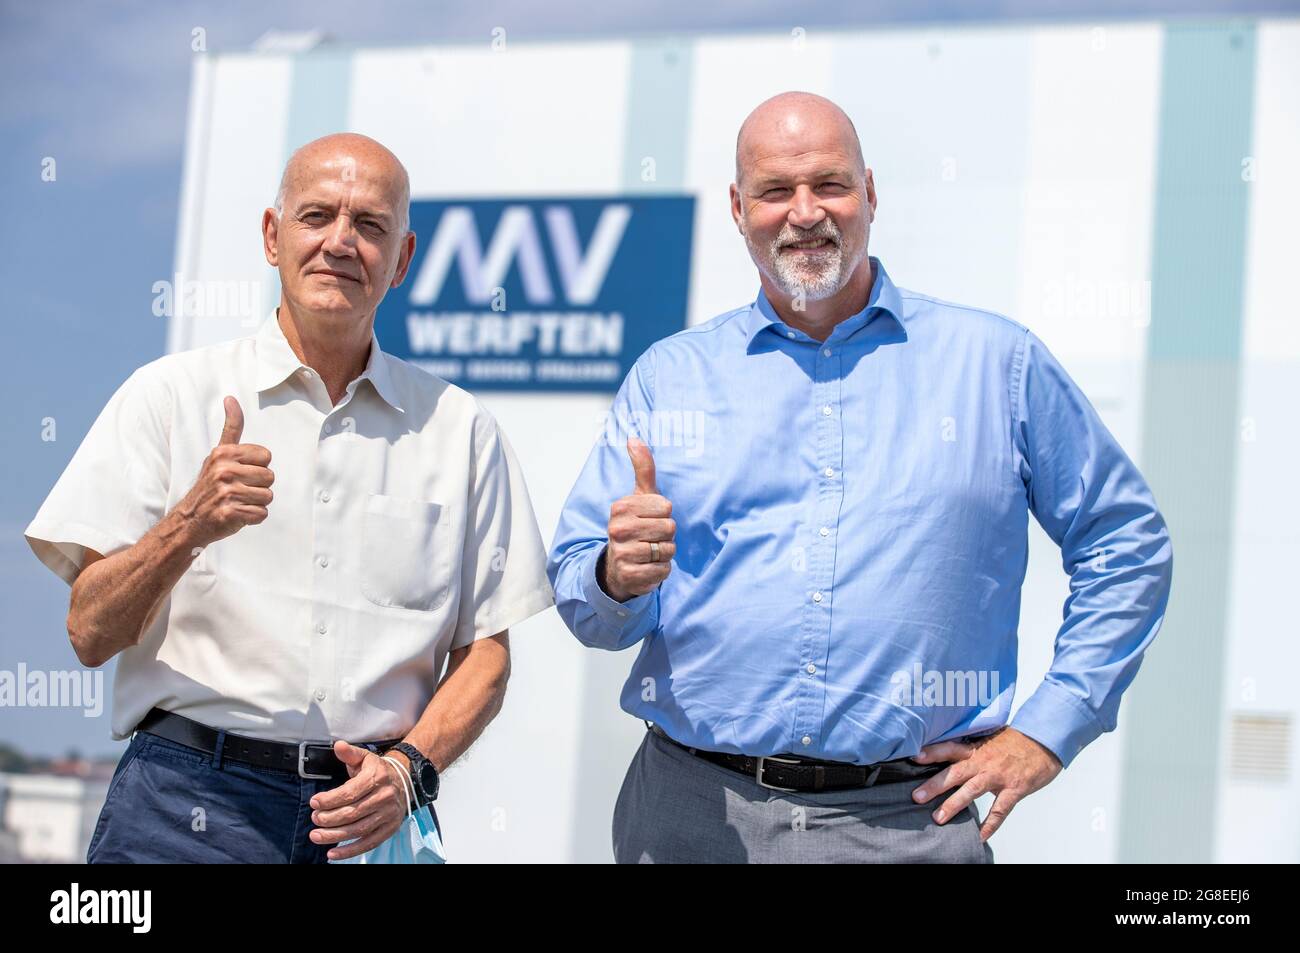 Wismar, Germany. 14th July, 2021. Carsten Haake (r), Managing Director Finance and Administration at MV Werften and Peter Fetten (l), Managing Director of MV Werften, stand in front of the shipbuilding hall. The incipient recovery of the international cruise market is also raising hopes of recovery at the MV Werften Group. Currently, the company is concentrating on the completion of the 'Global Dream'. Delivery of the 342-meter-long, 20-deck-high ship is scheduled for mid-2022. Credit: Jens Büttner/dpa-Zentralbild/dpa/Alamy Live News Stock Photo